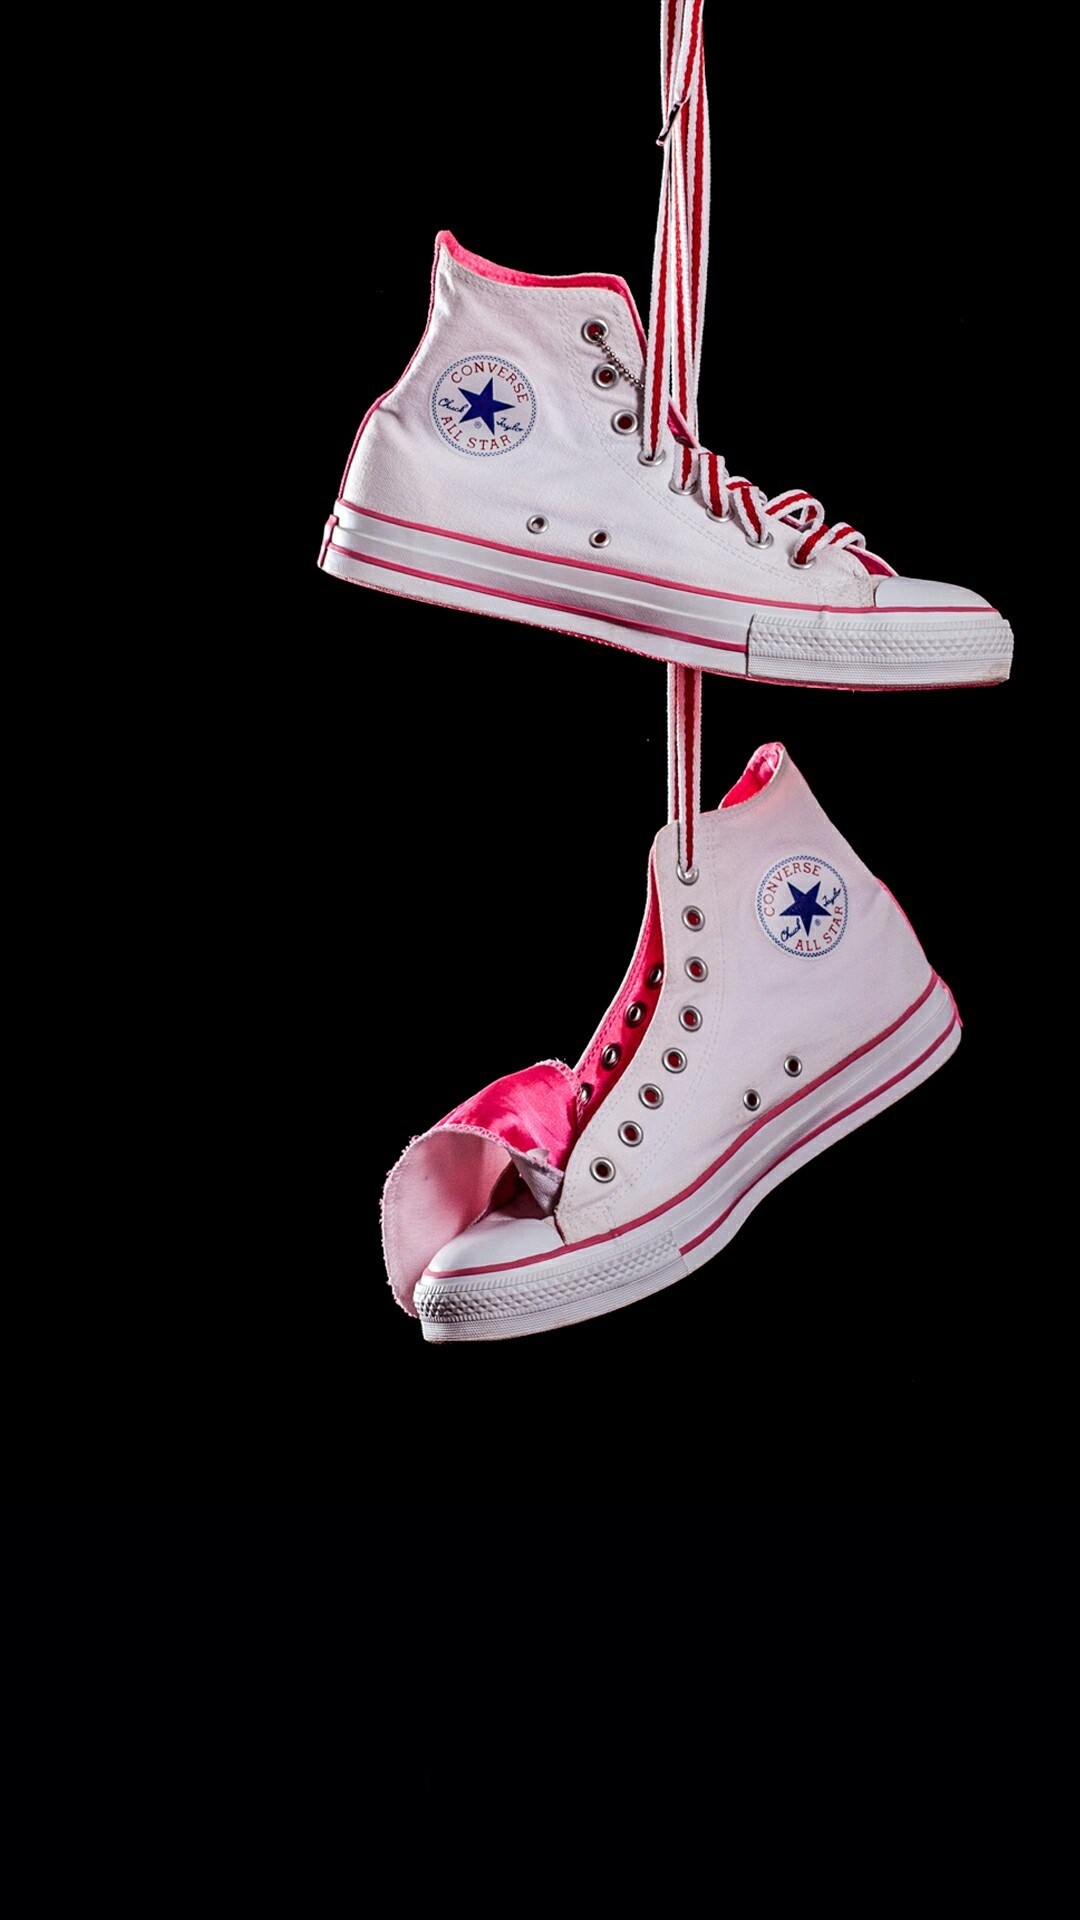 1080x1920 Misc iPhone 6 Plus Wallpapers - Hanging Converse White Pink iPhone 6 Plus  HD Wallpaper